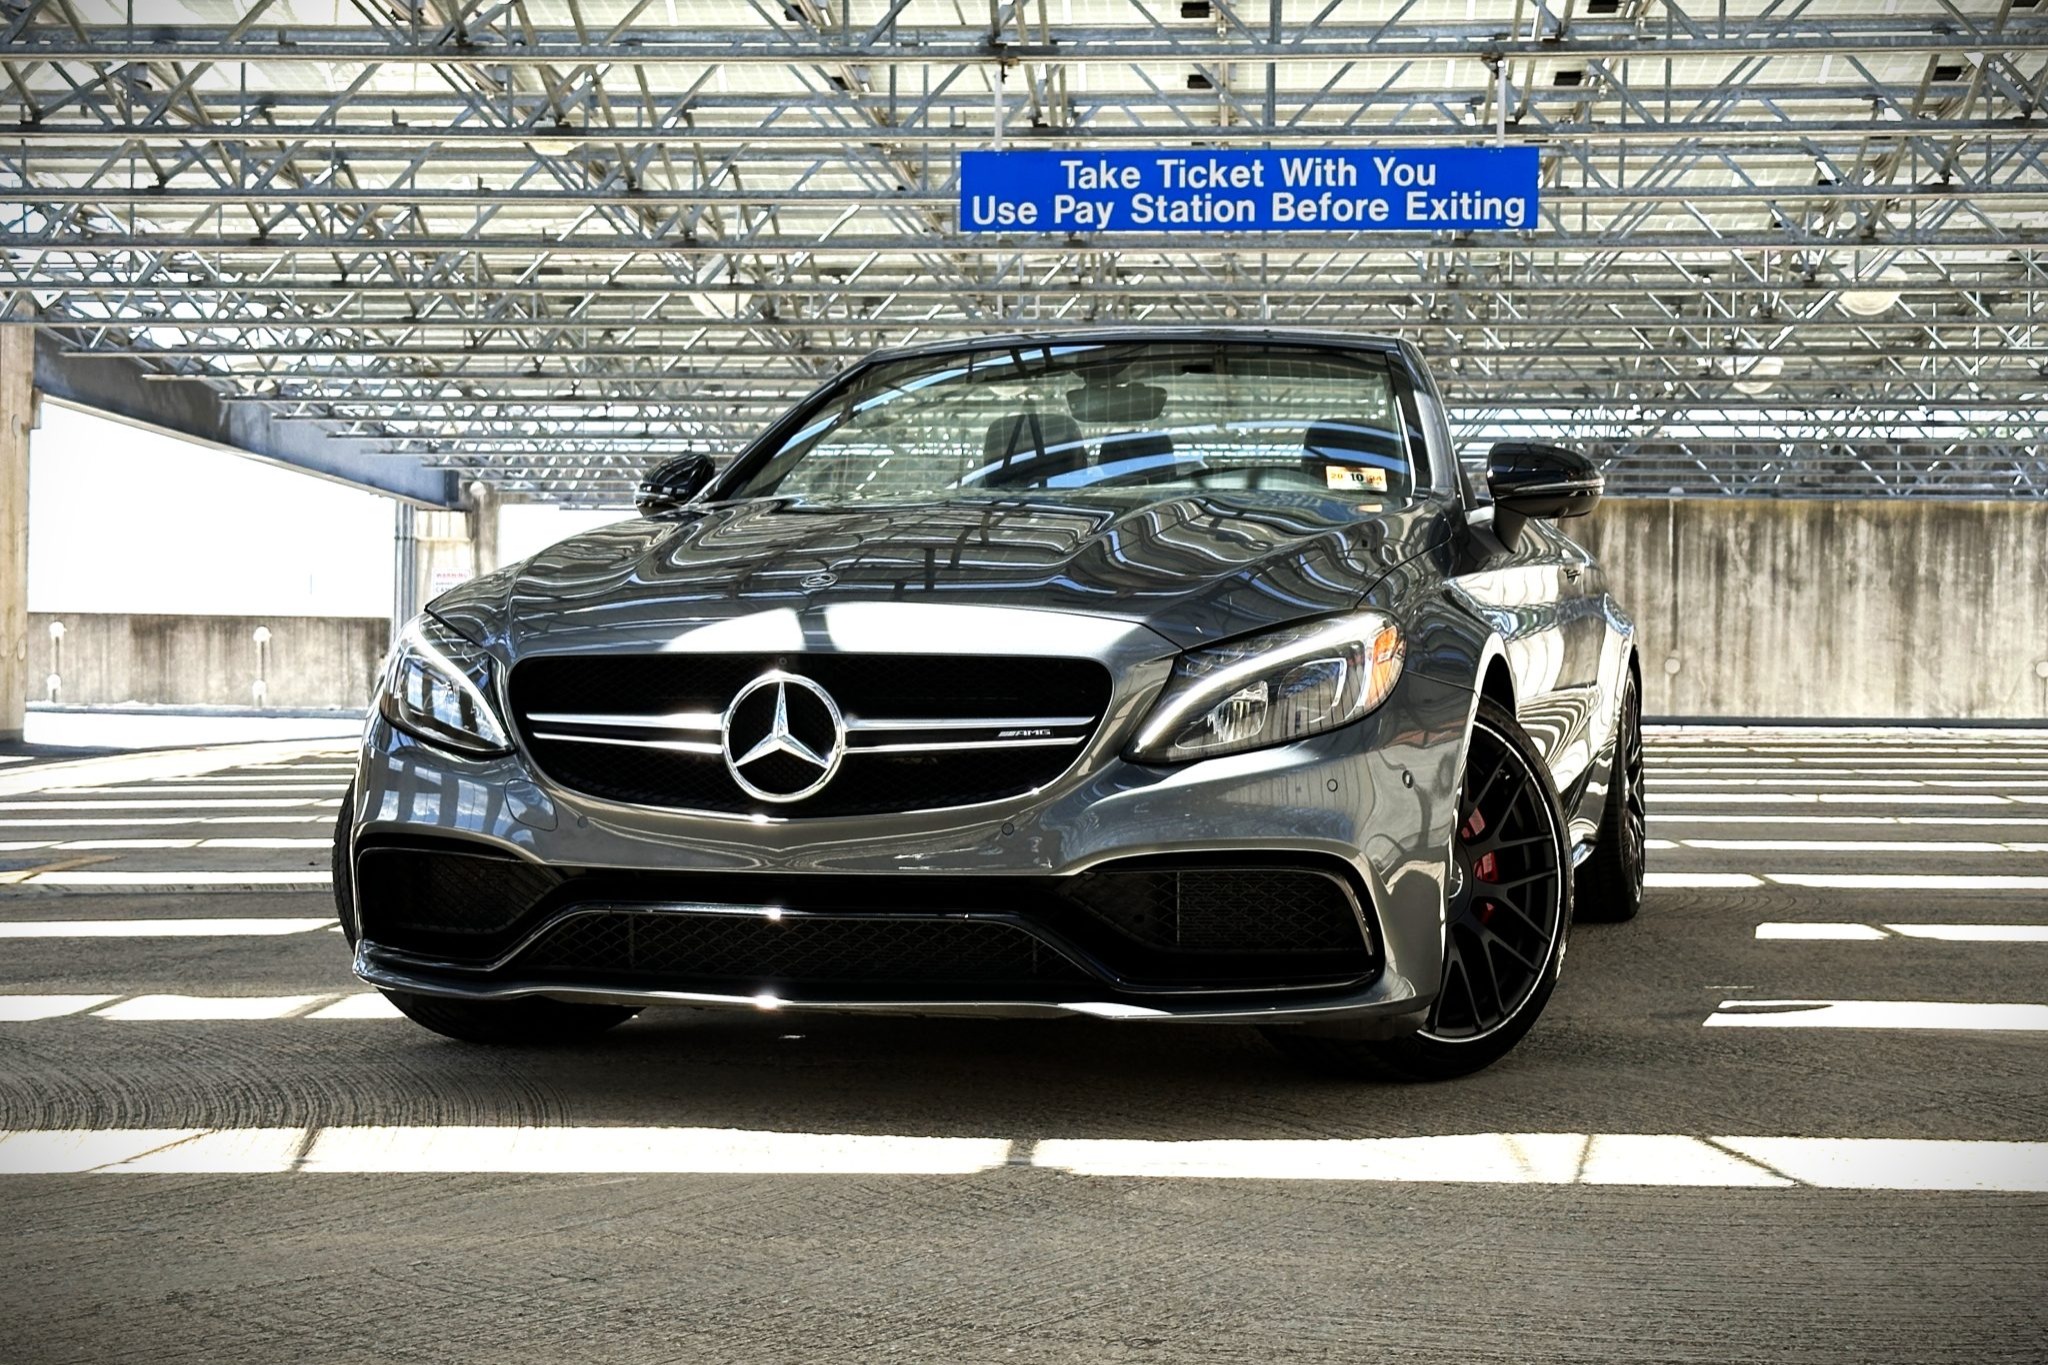 Used 14k-Mile 2017 Mercedes-AMG C63 S Cabriolet Review